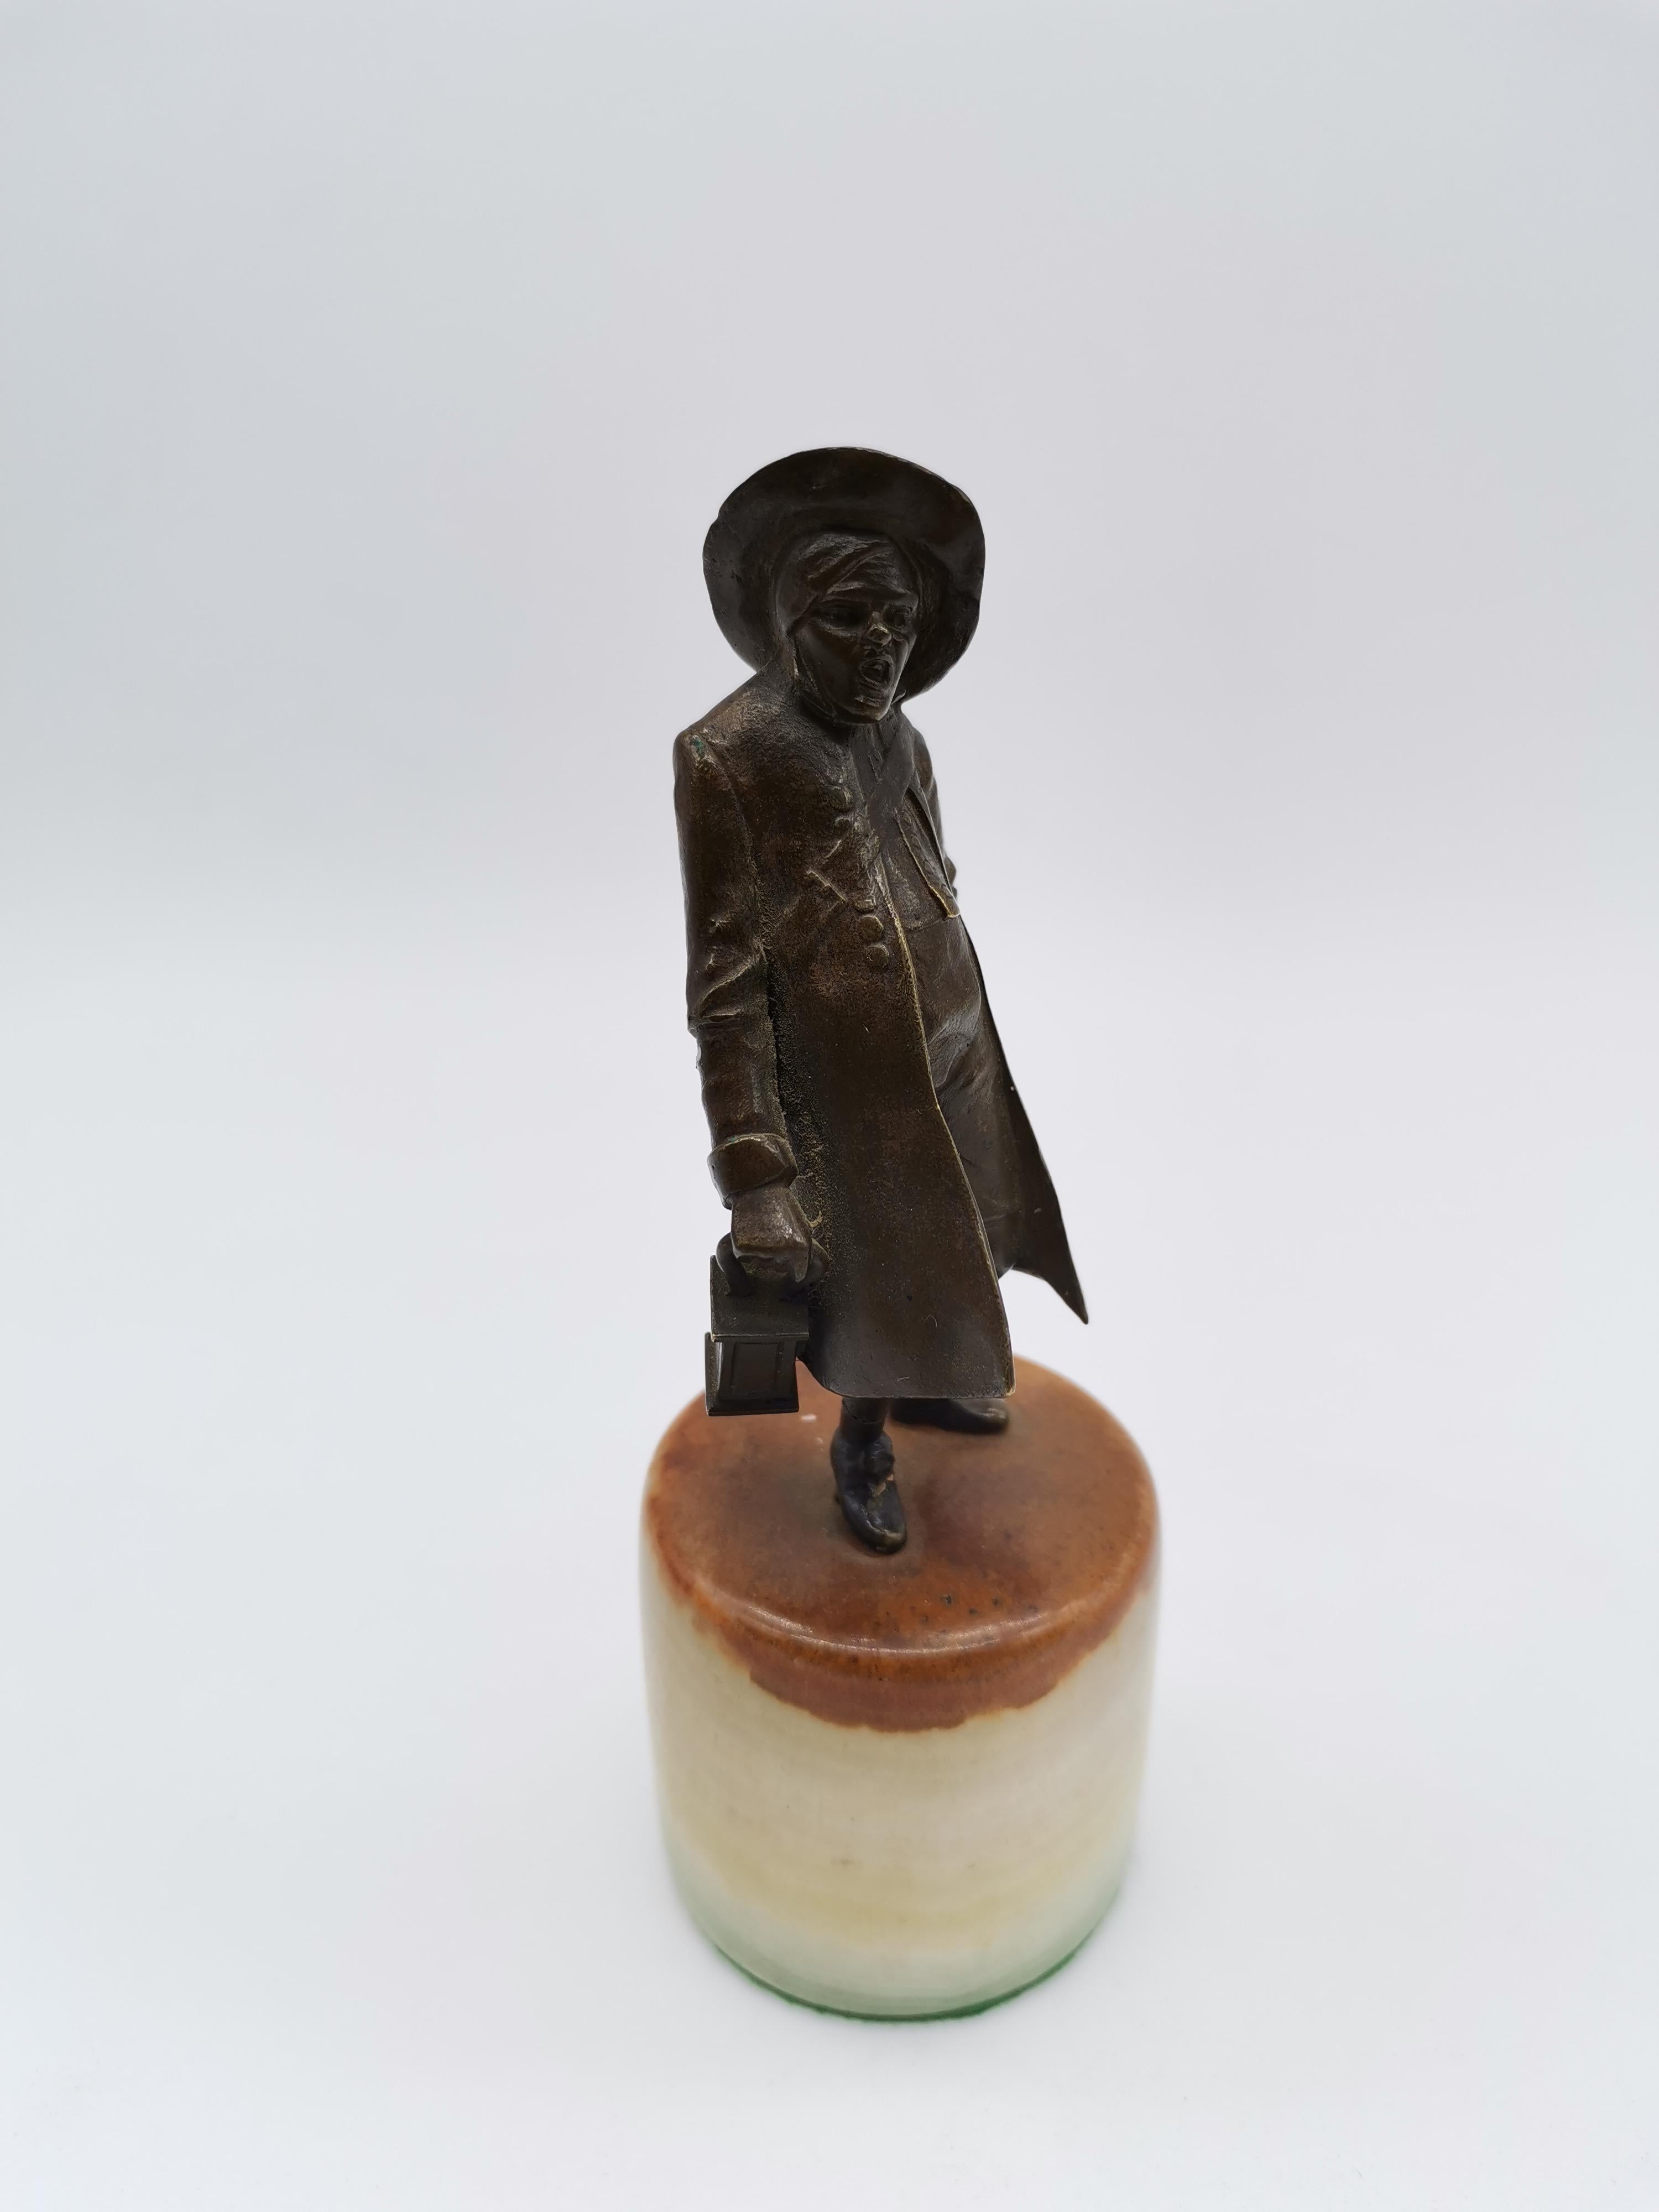 A figurine of a night watchman on a pedestal of marblestone.